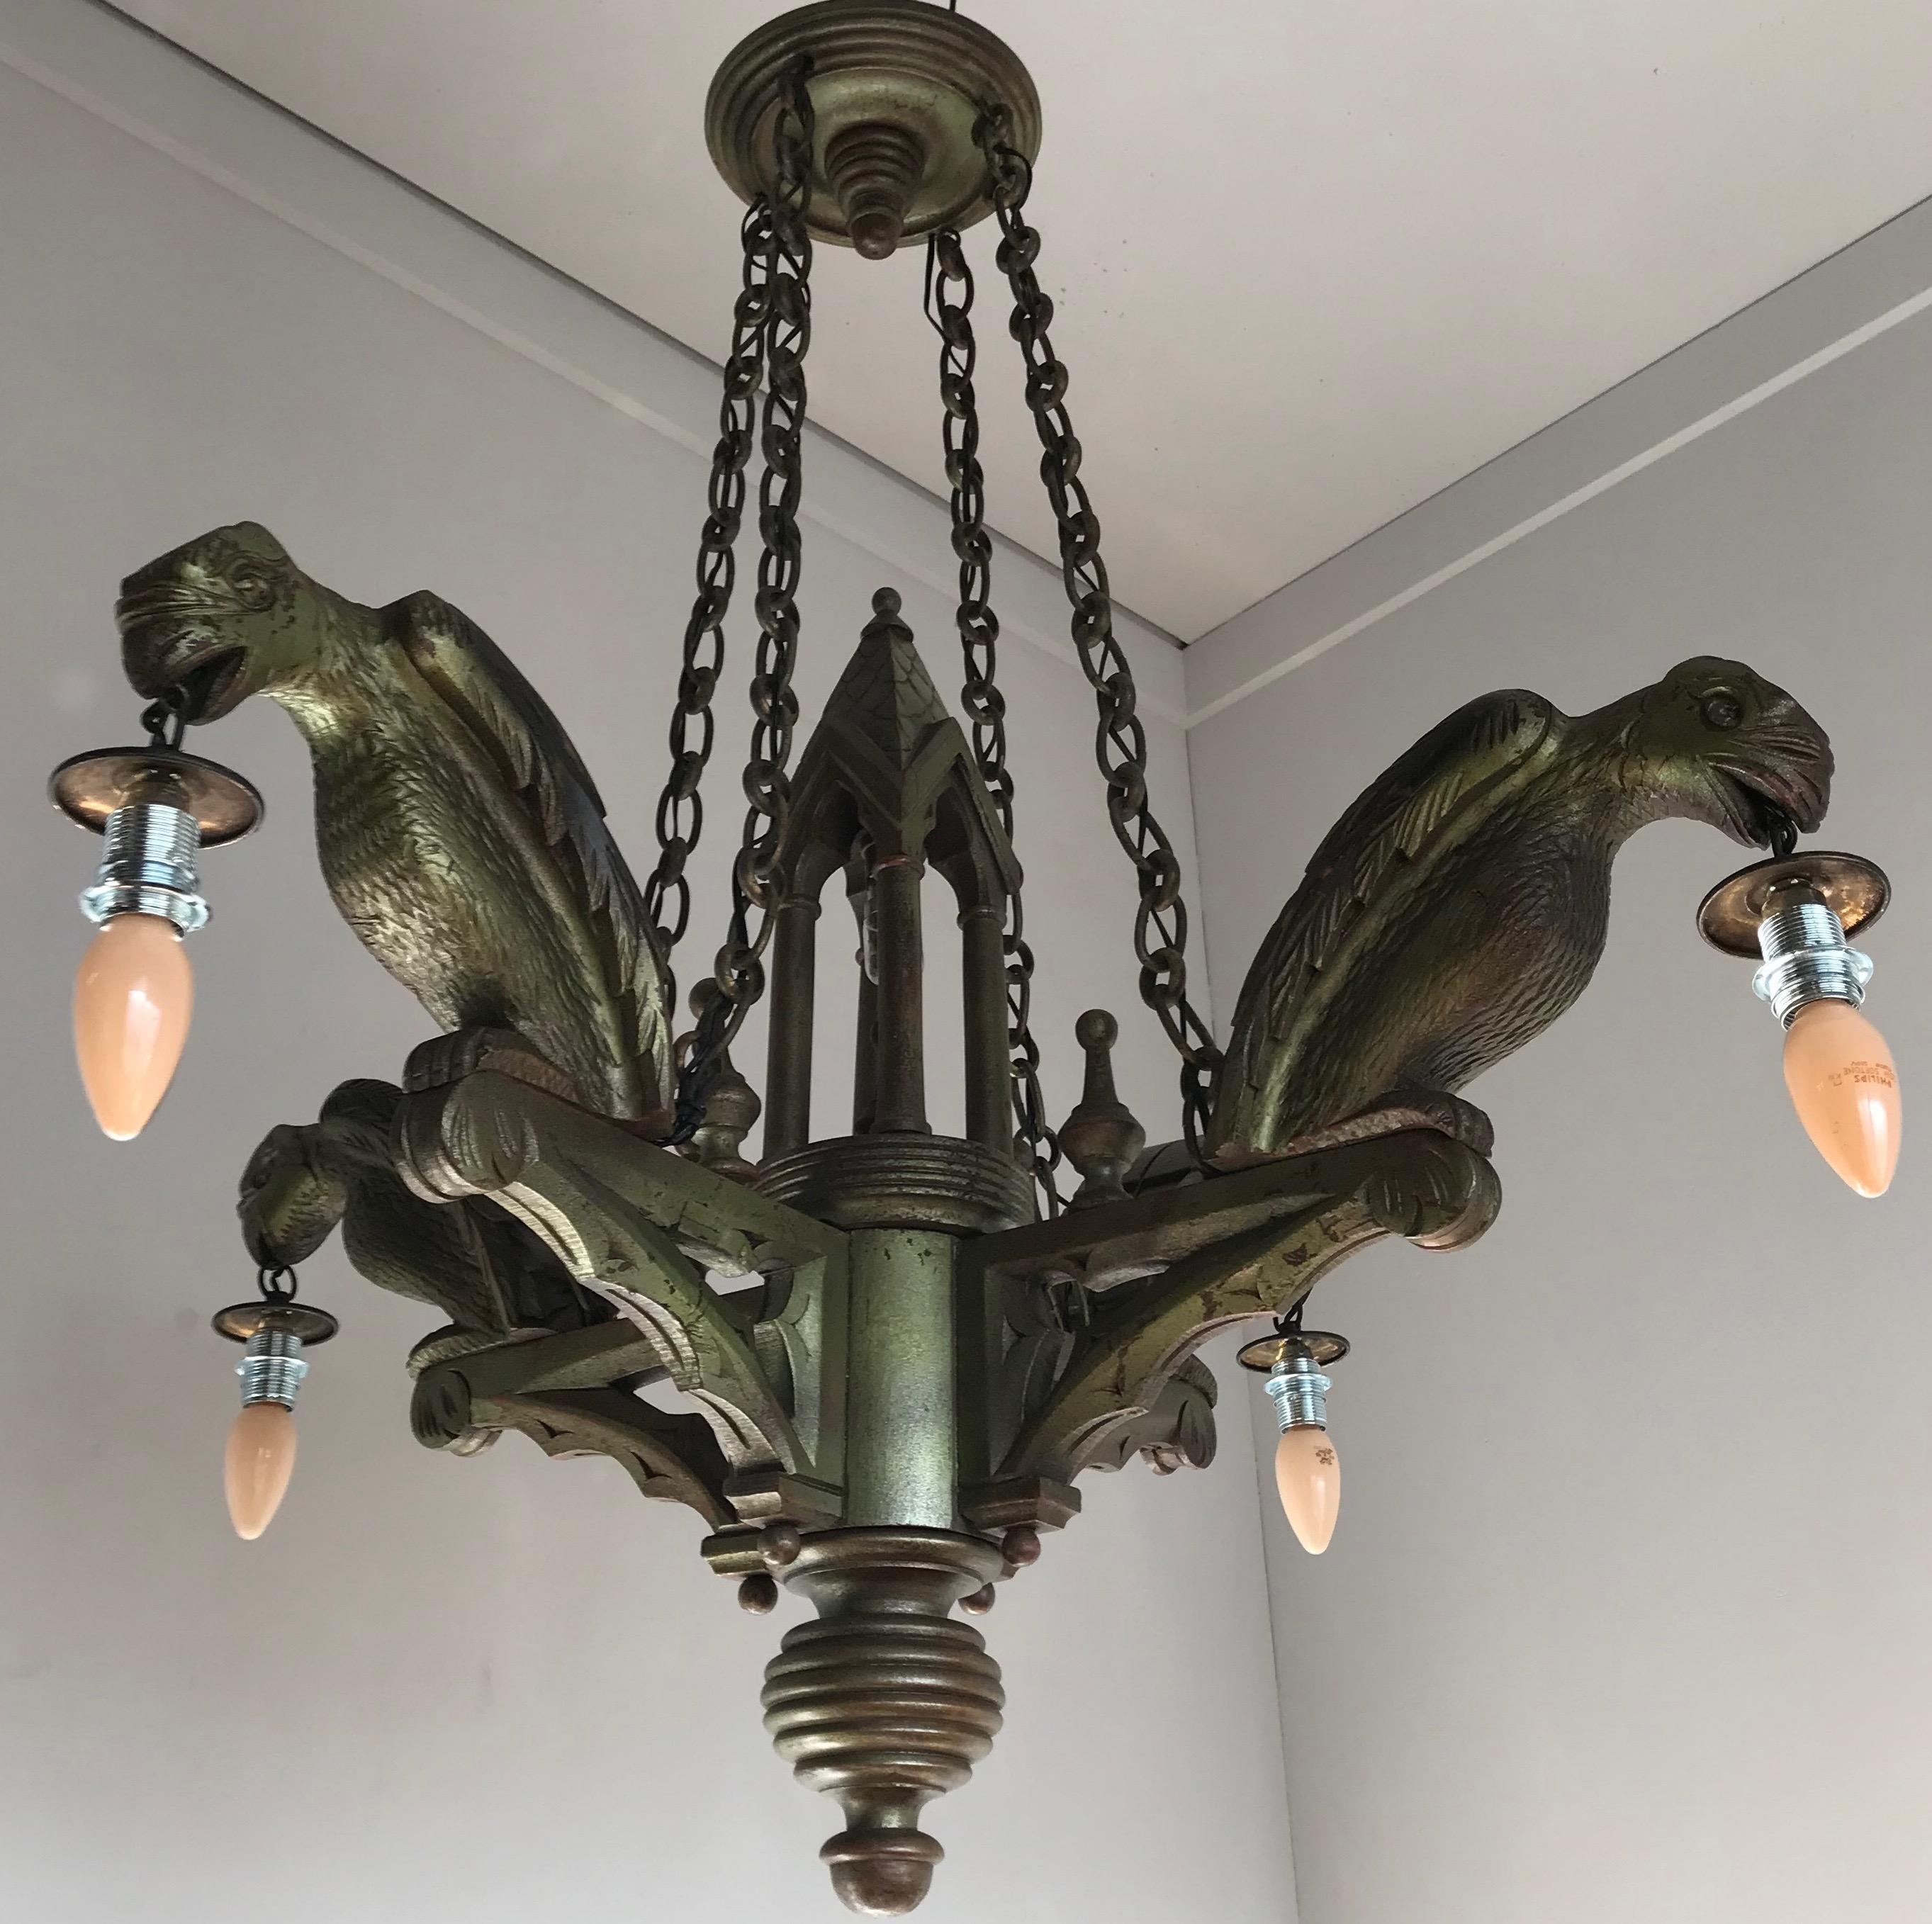 Rare Hand Carved Wooden Gothic Revival Art Chandelier with Gargoyle Sculptures In Good Condition For Sale In Lisse, NL